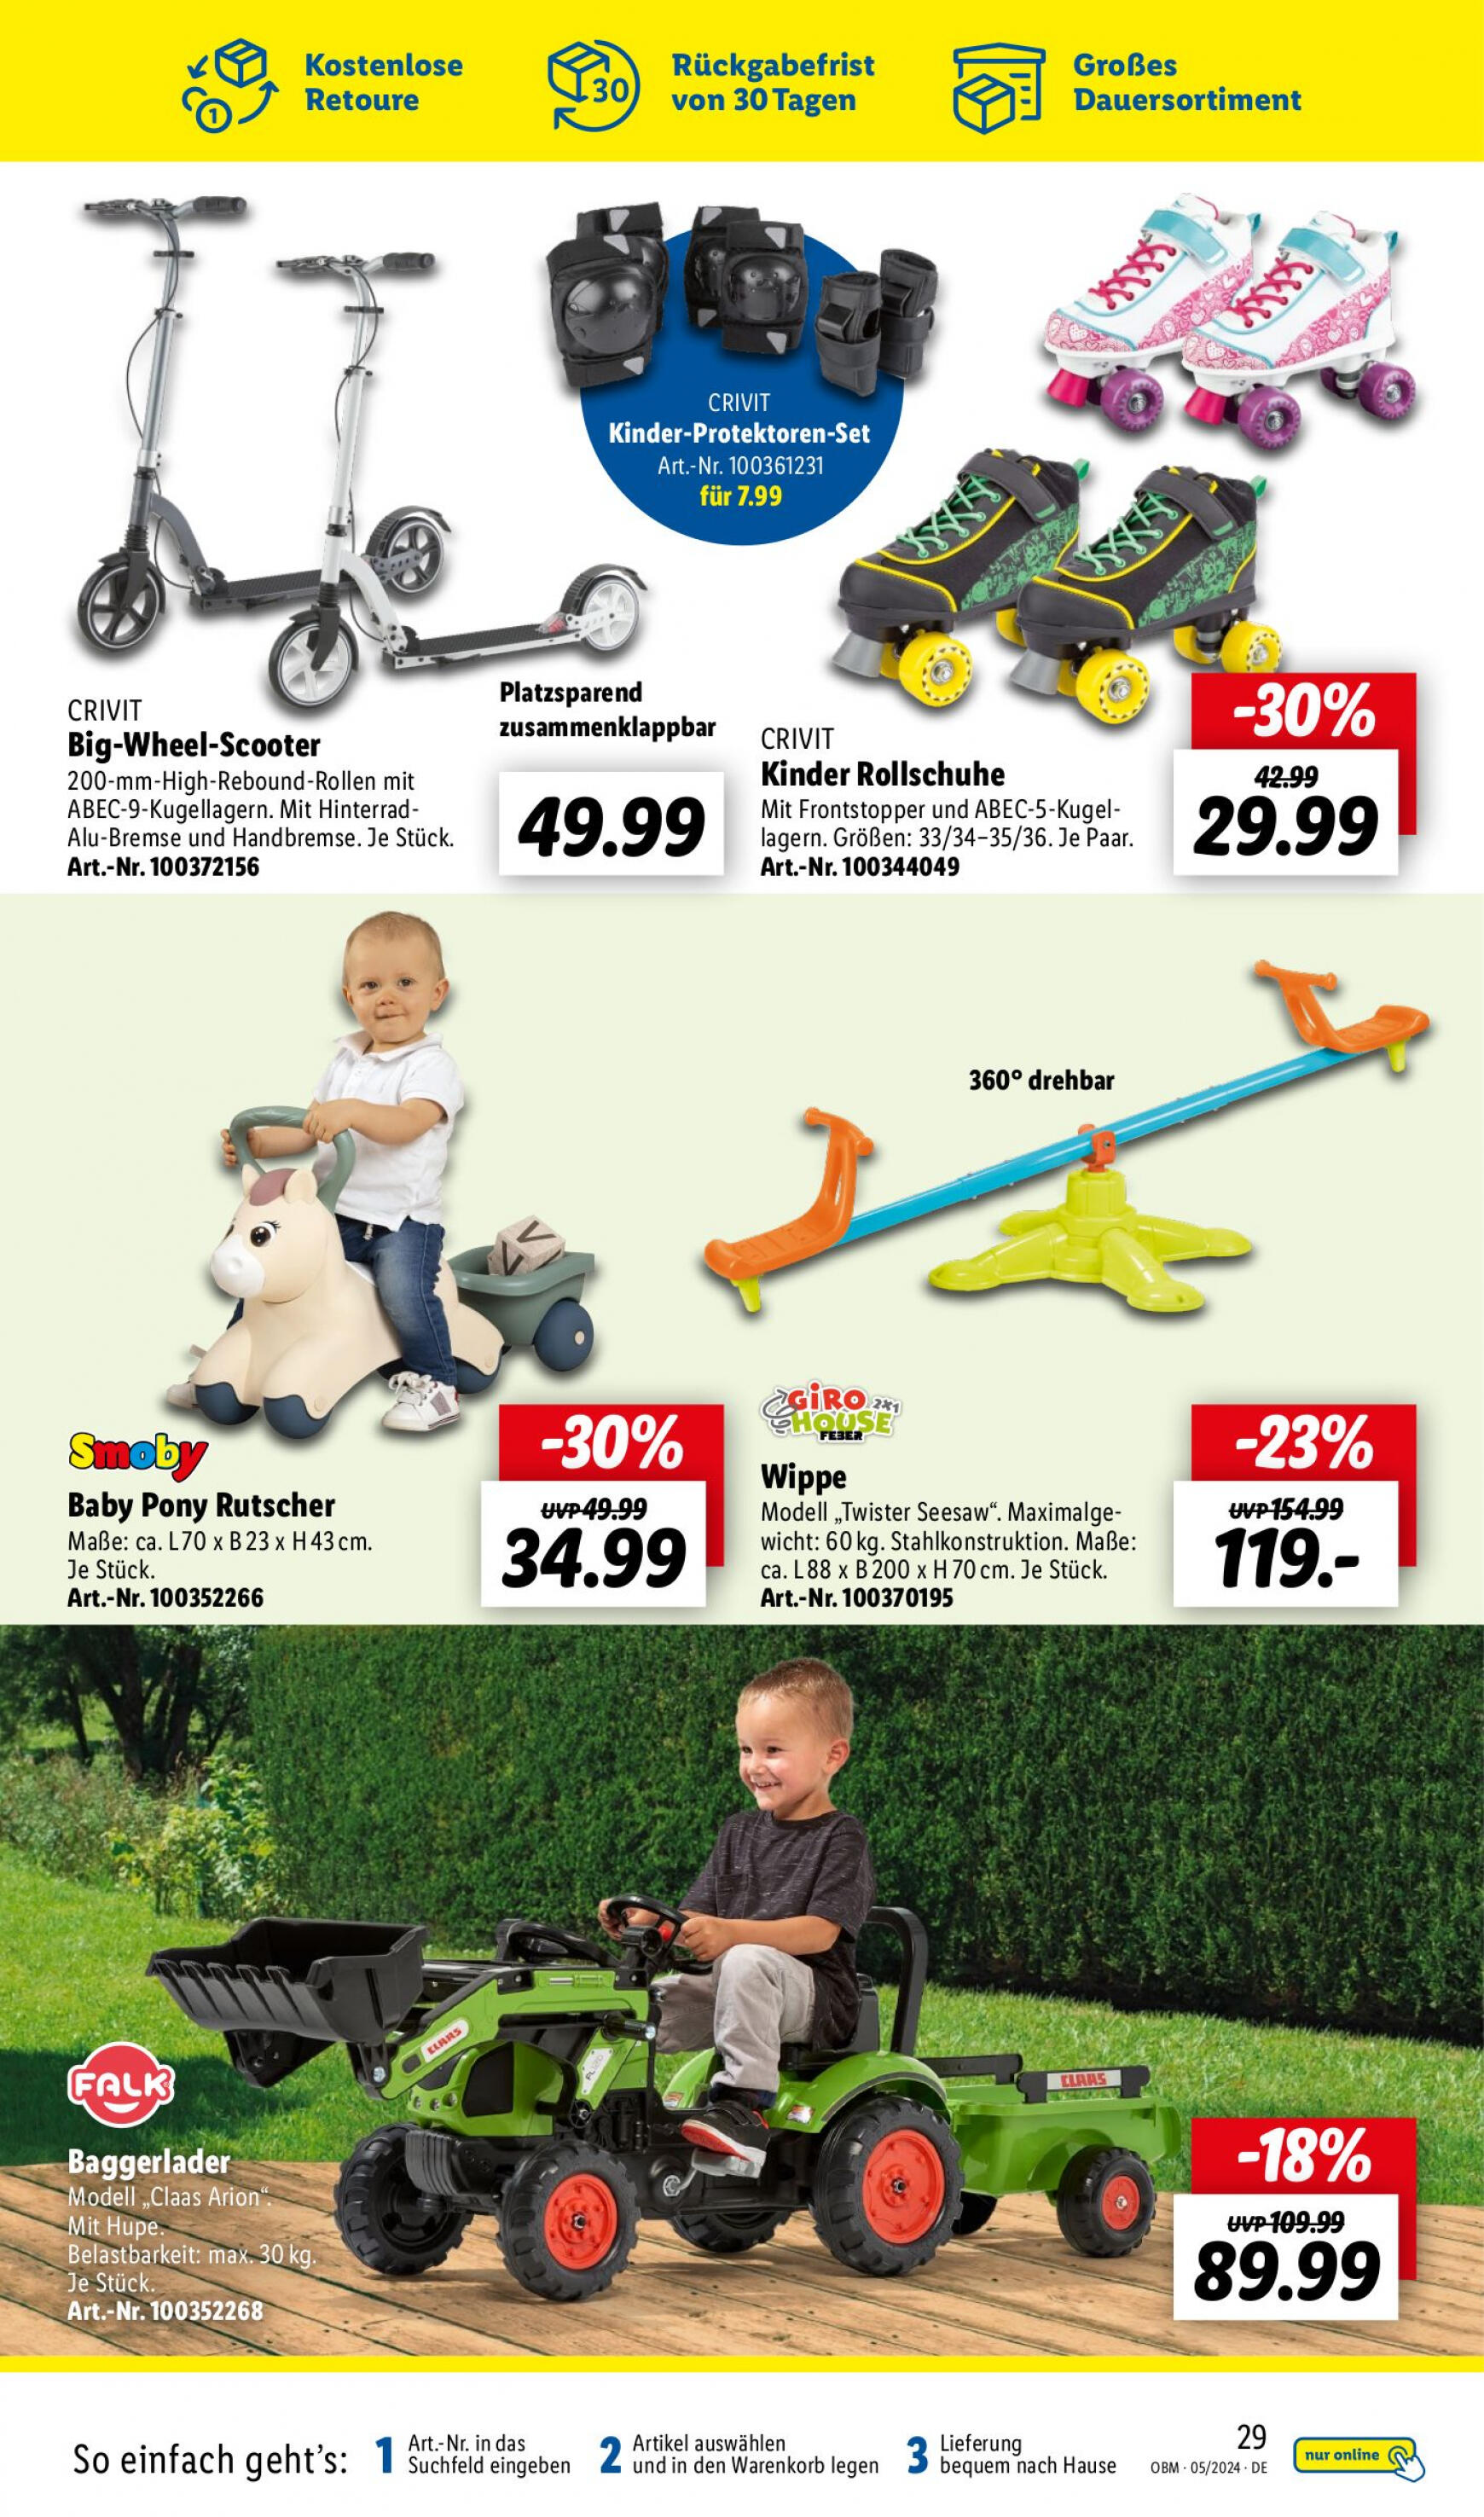 lidl - Flyer Lidl - Aktuelle Onlineshop-Highlights aktuell 01.05. - 31.05. - page: 29